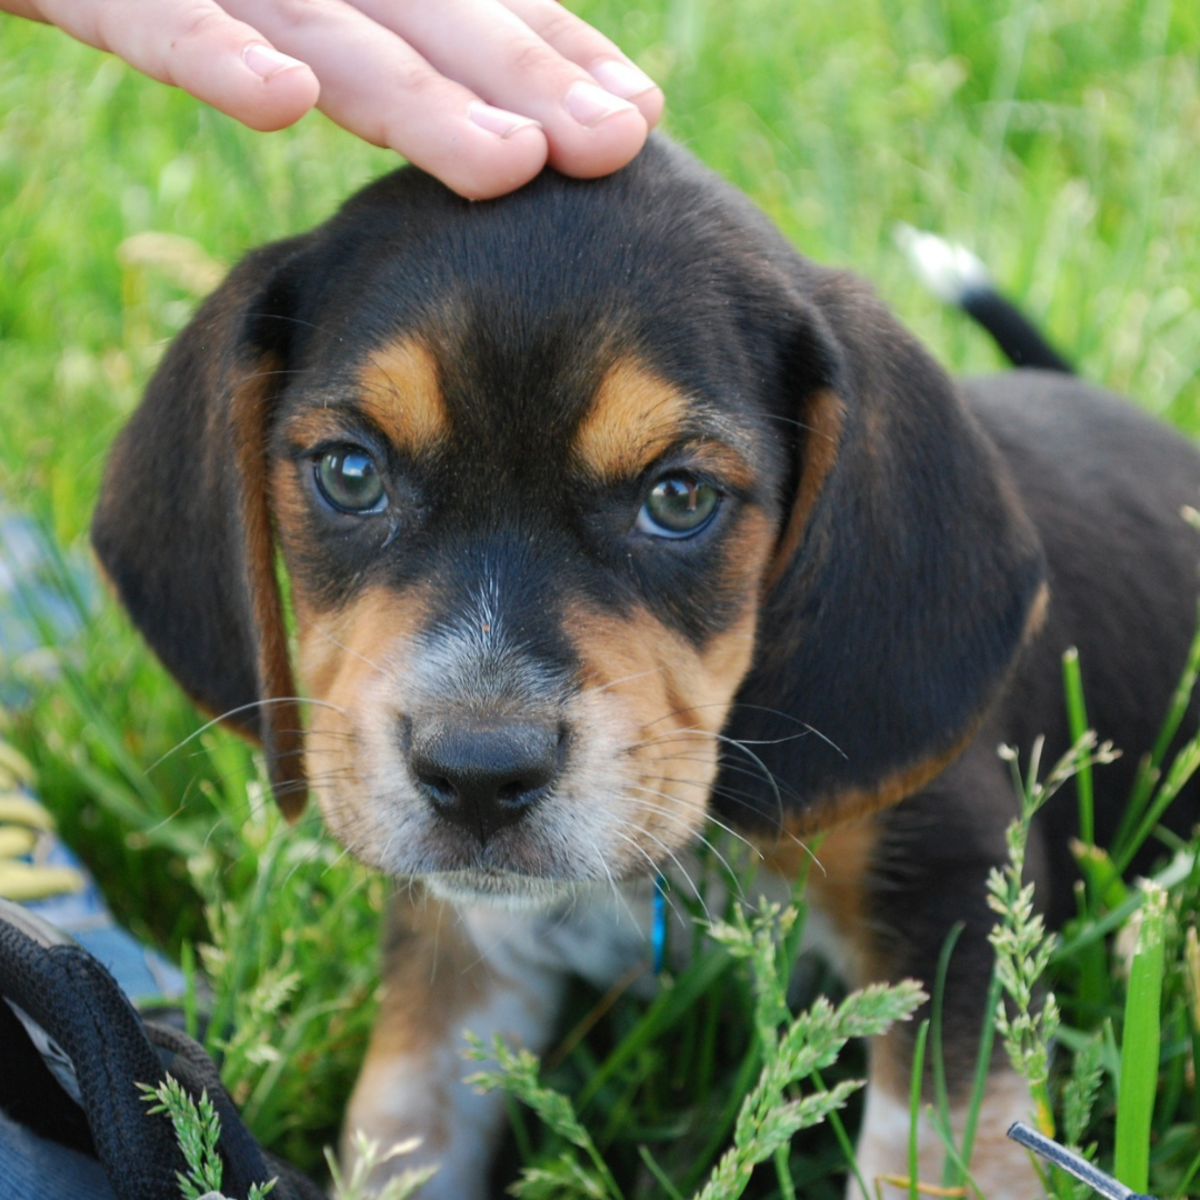 Beagles are sensitive dogs. Use gentle training methods with them.
